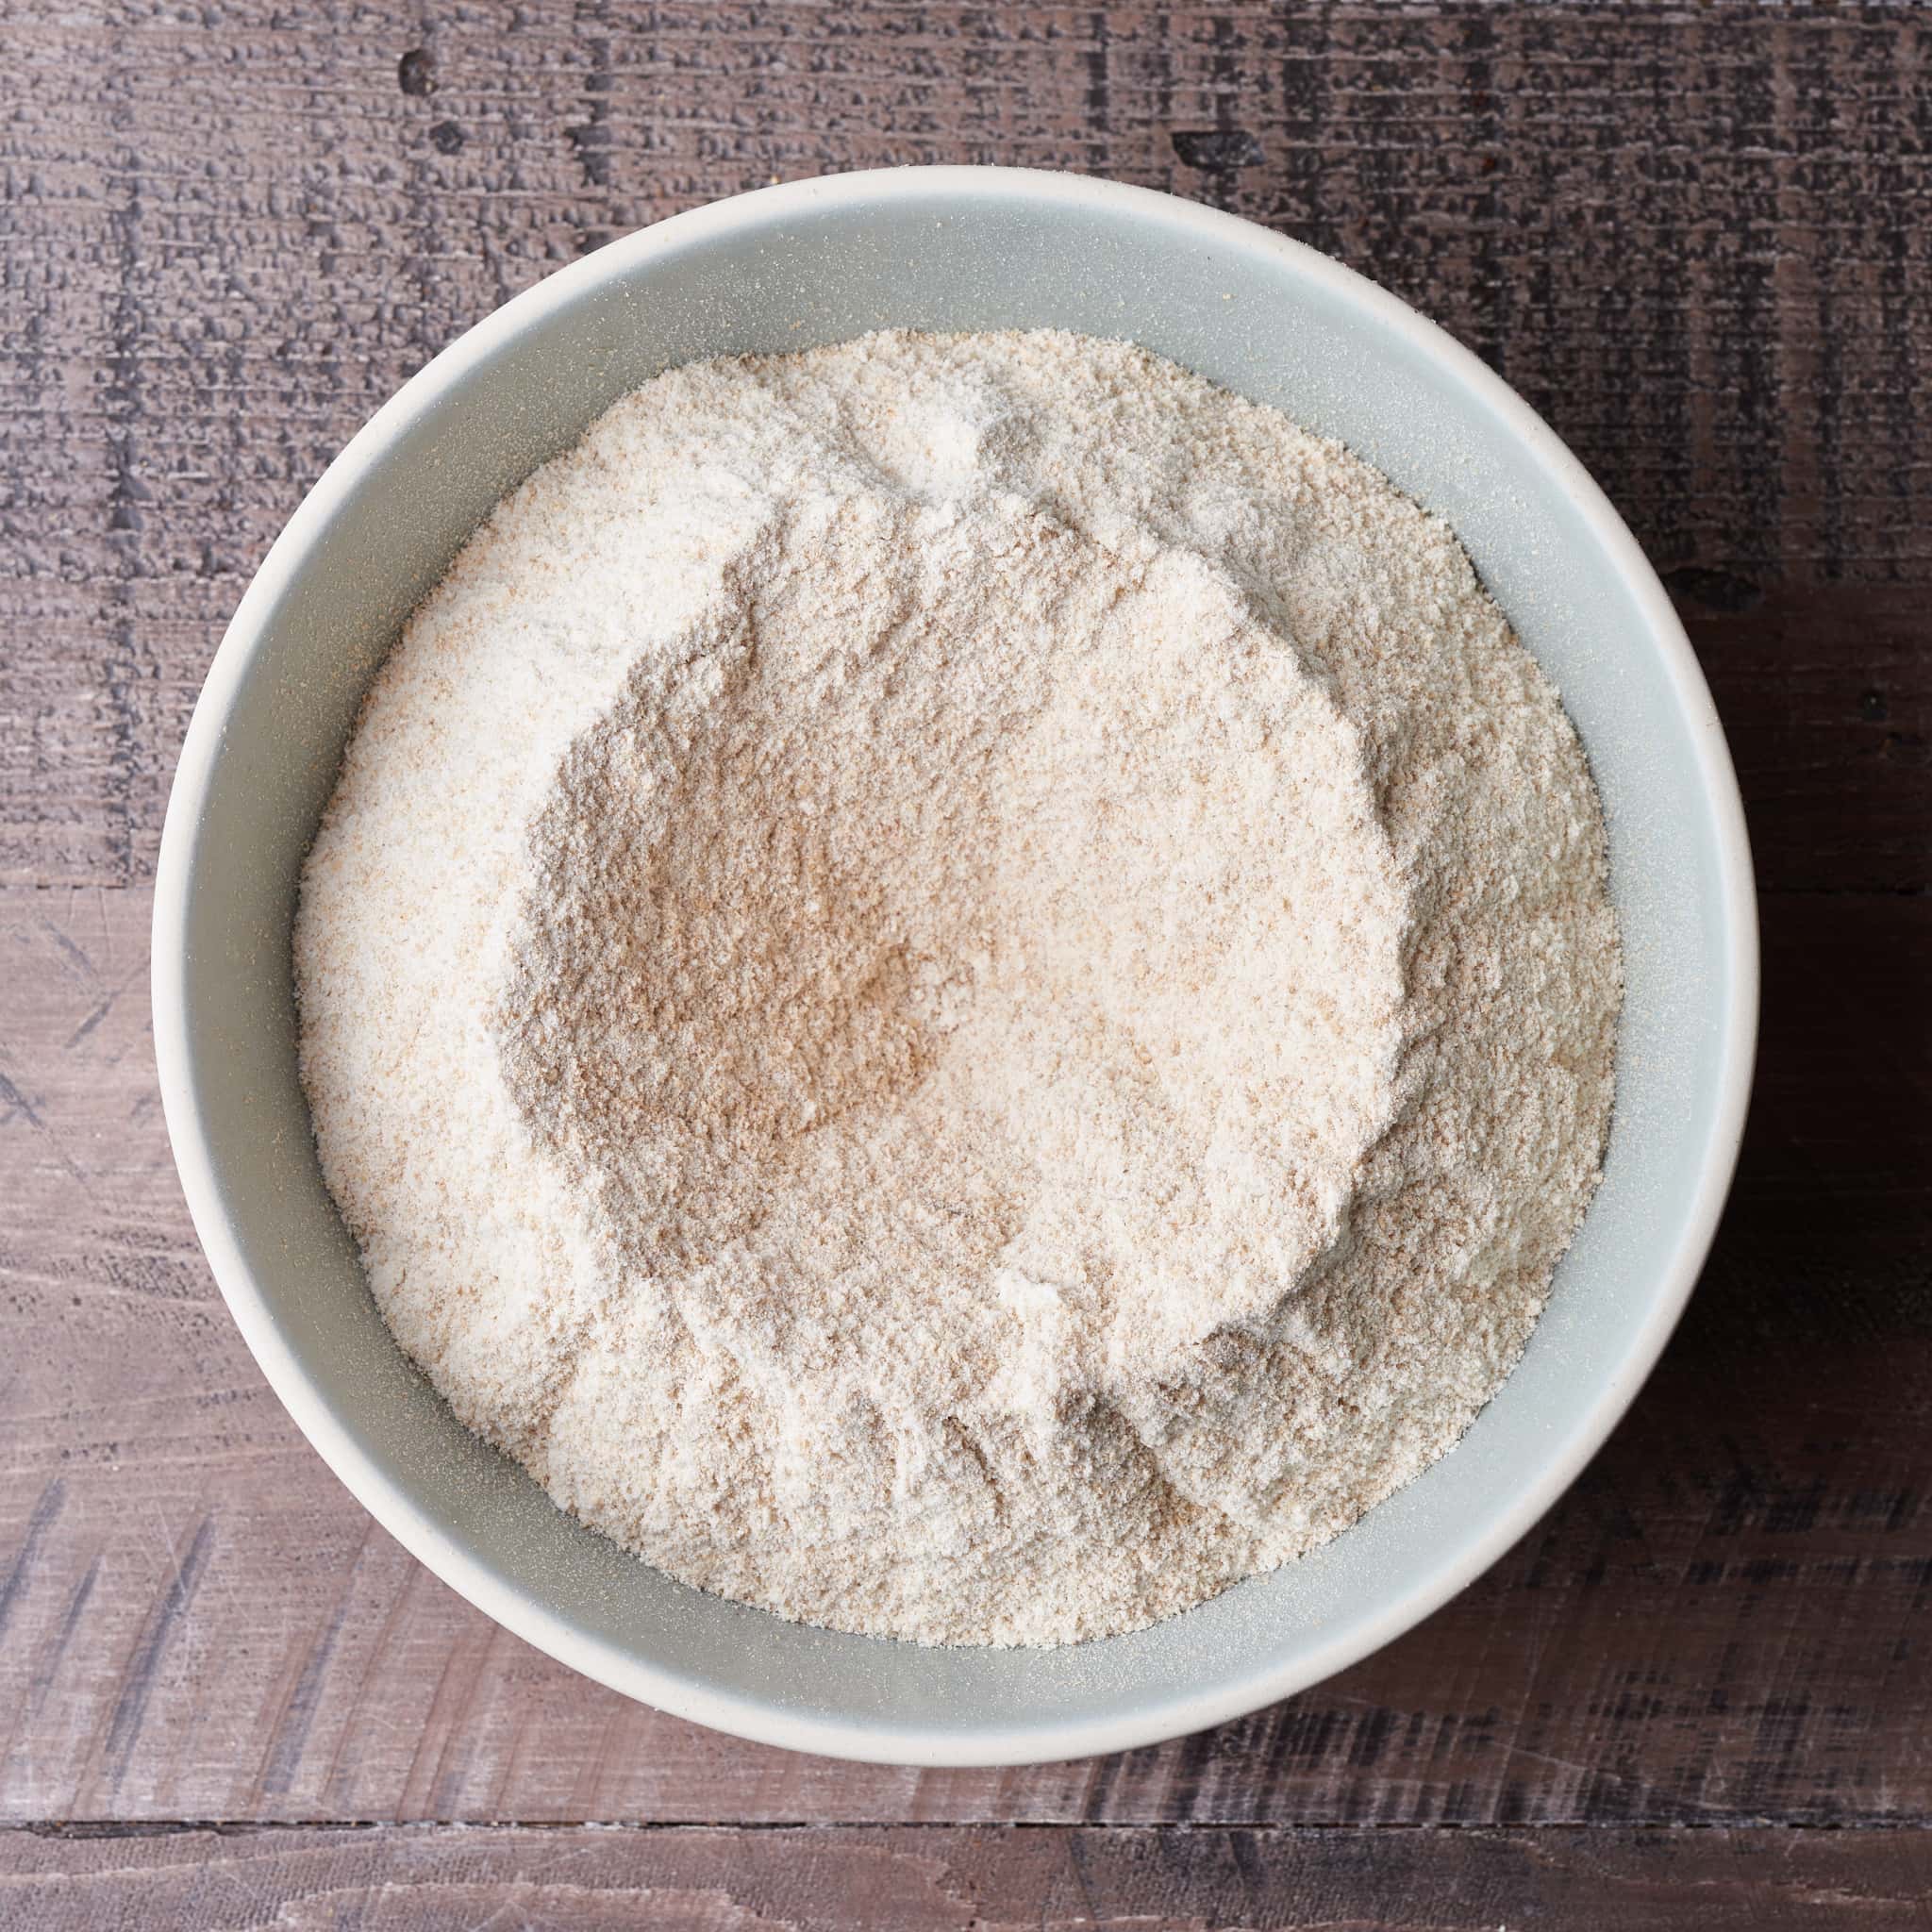 10 Best Flour Sifters For Your Home Baking